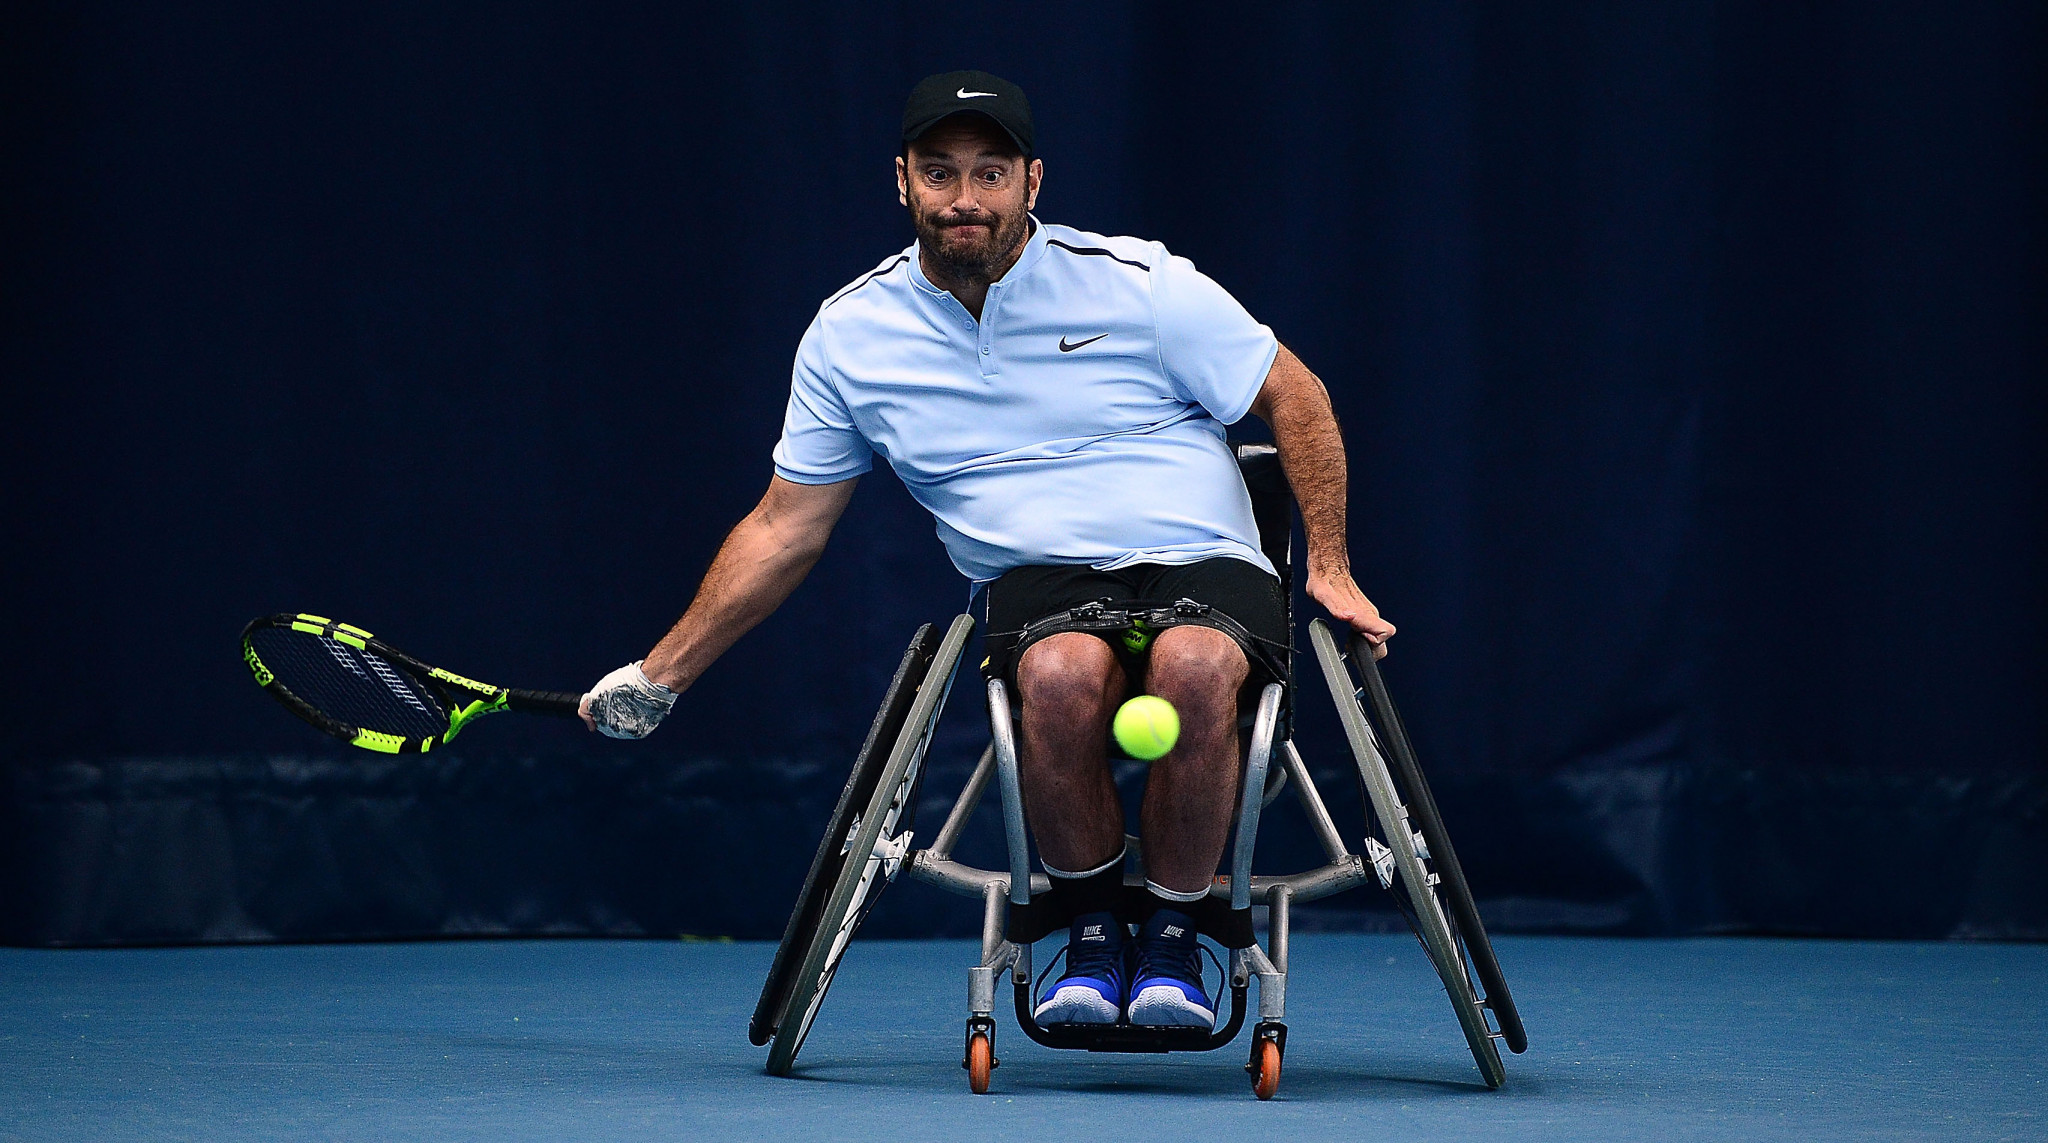 World number one ranking the top prize at NEC Wheelchair Tennis Masters